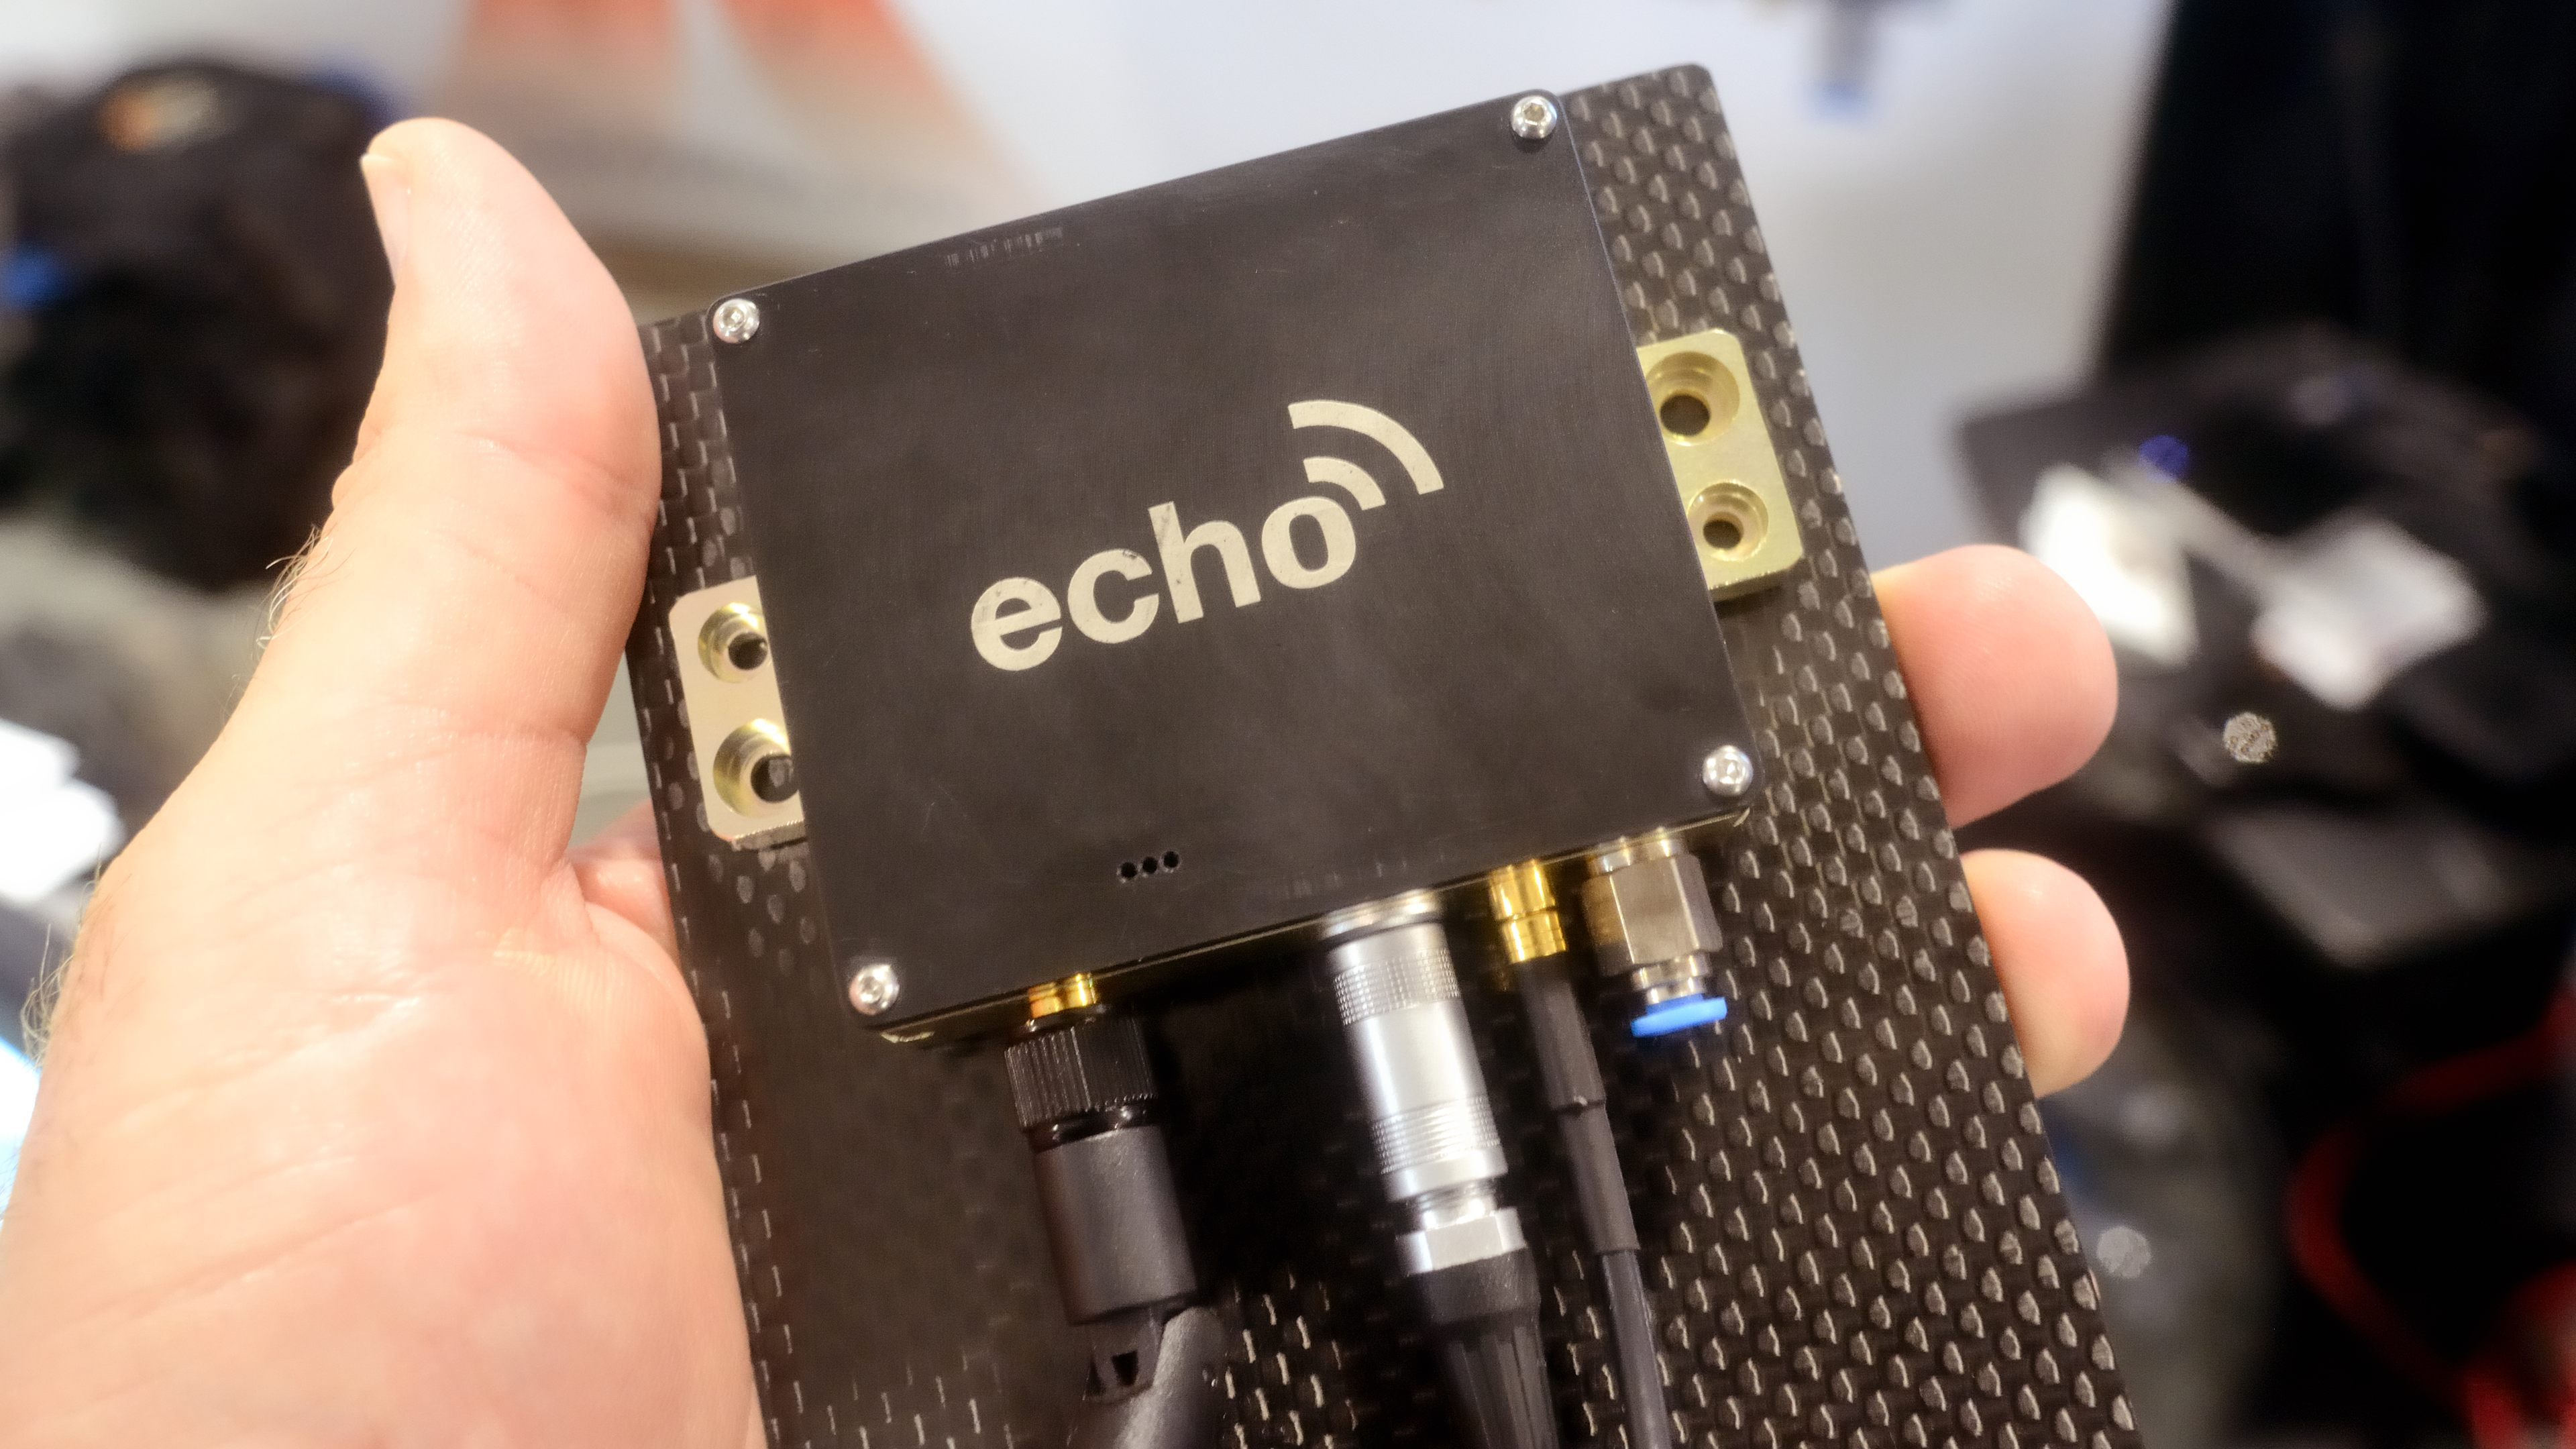 Based on the small UATs that uAvionix has built for drones, its Echo ATU-20--a non-TSOed unit intended for experimental and some light sport aircraft--fits in the palm of a hand, and weighs 75 grams. Photo by Mike Collins.